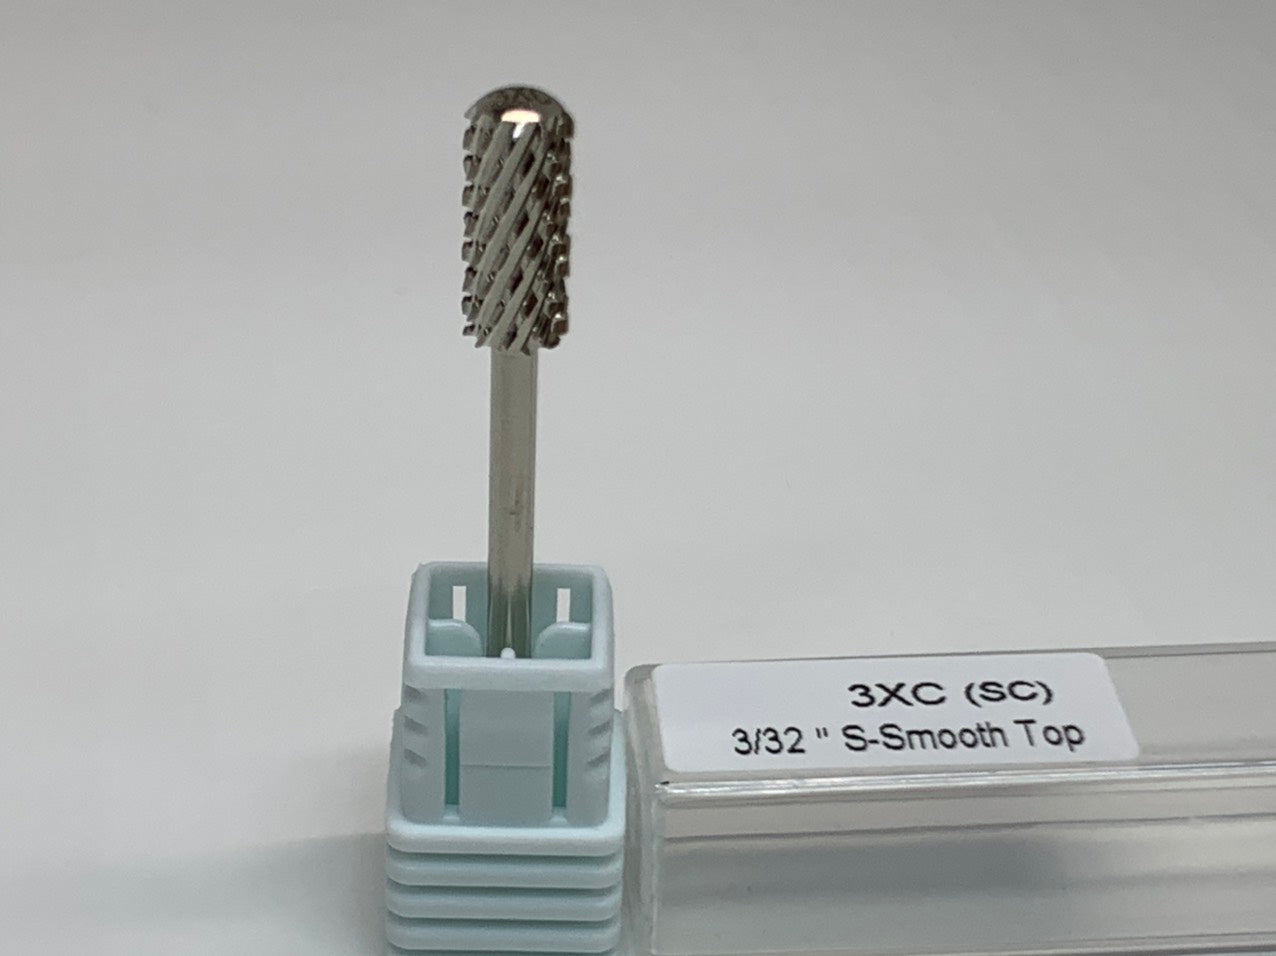 Drill bit 3XC (sc) 3/32’’ S-Smooth top | BUY 5 GET 1 FREE